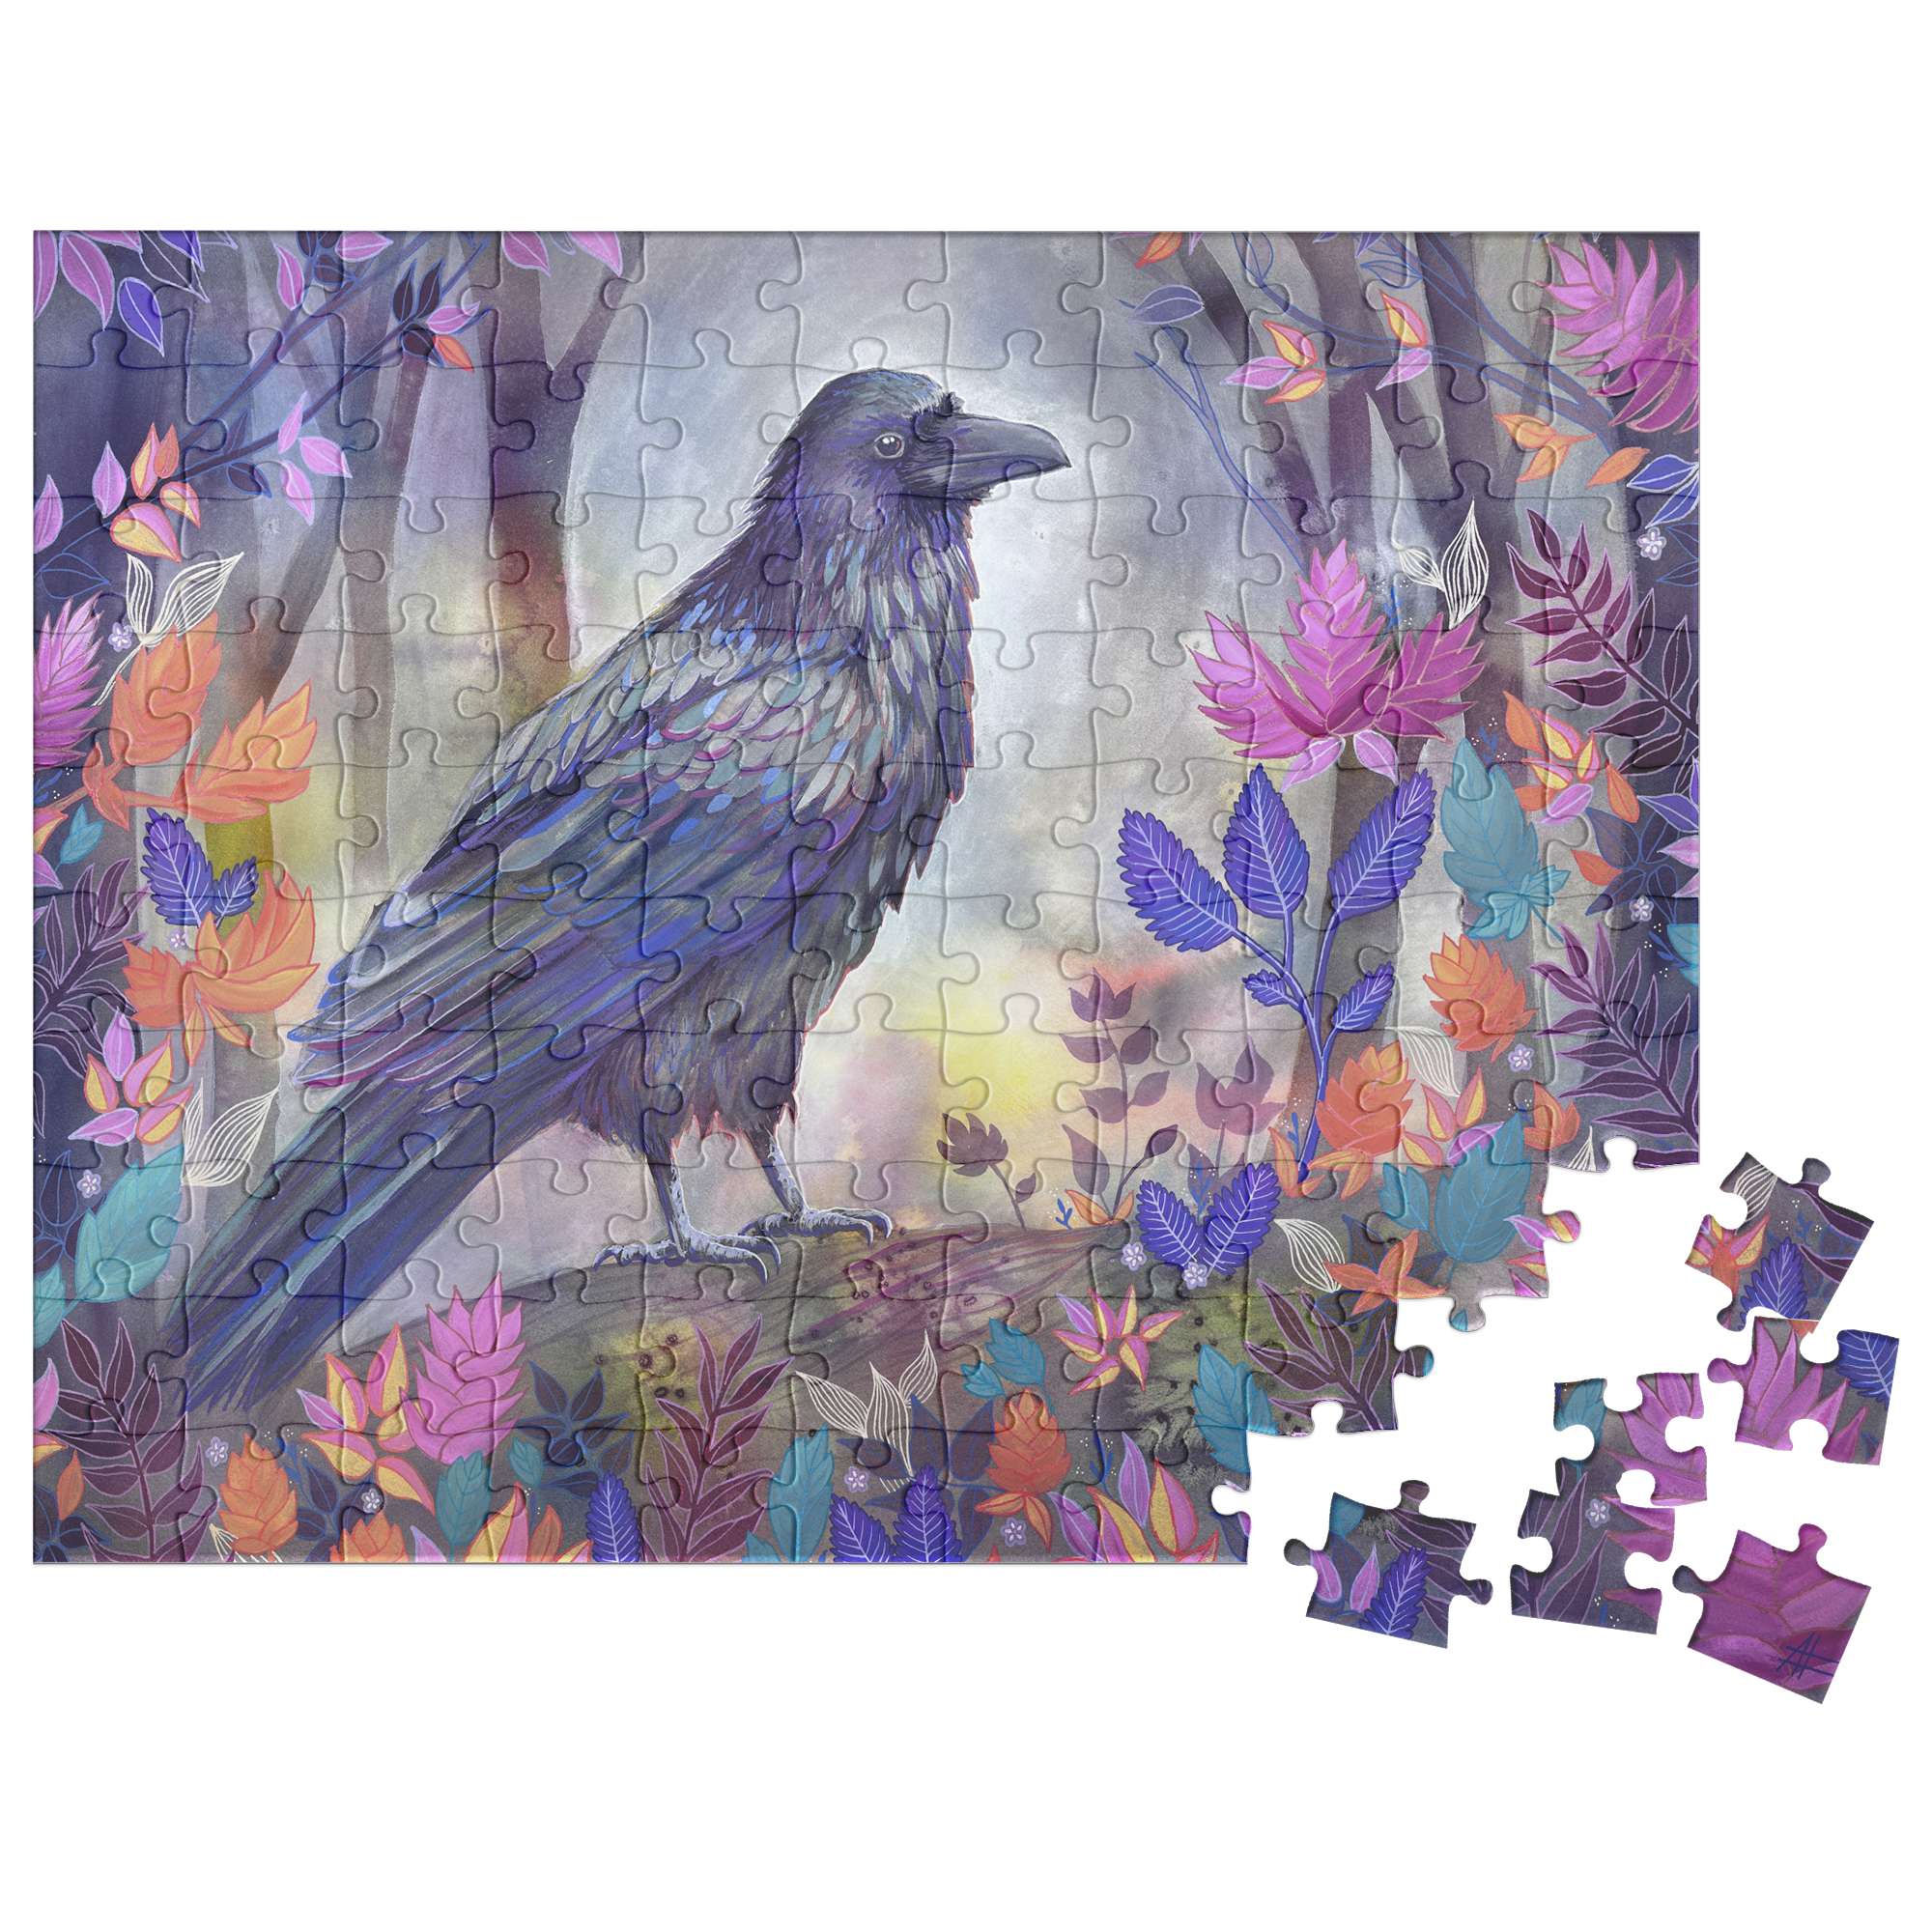 A Raven Puzzle with a few pieces missing, featuring a detailed image of a raven among colorful, stylized foliage.